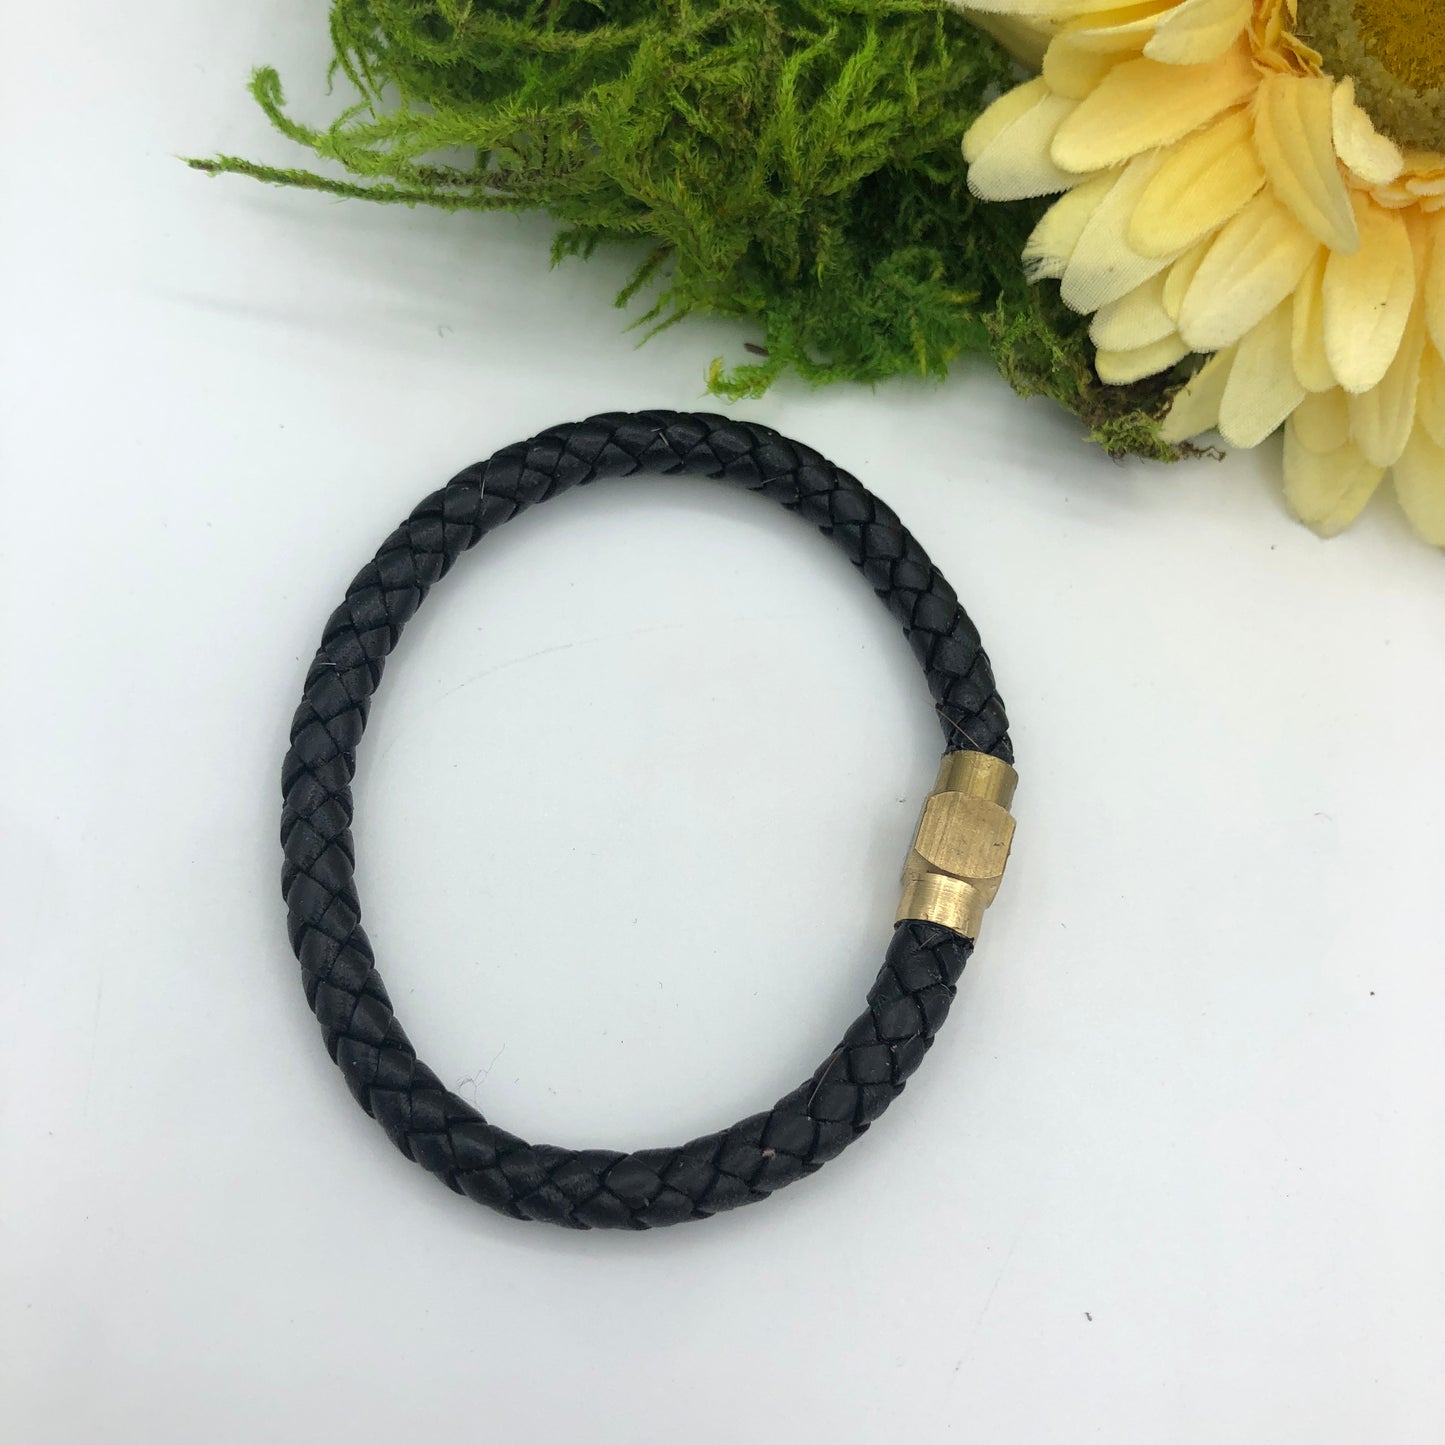 HANDCRAFTED 6MM LEATHER BOLO CORD BRACELET WITH MAGNET CLOSURE